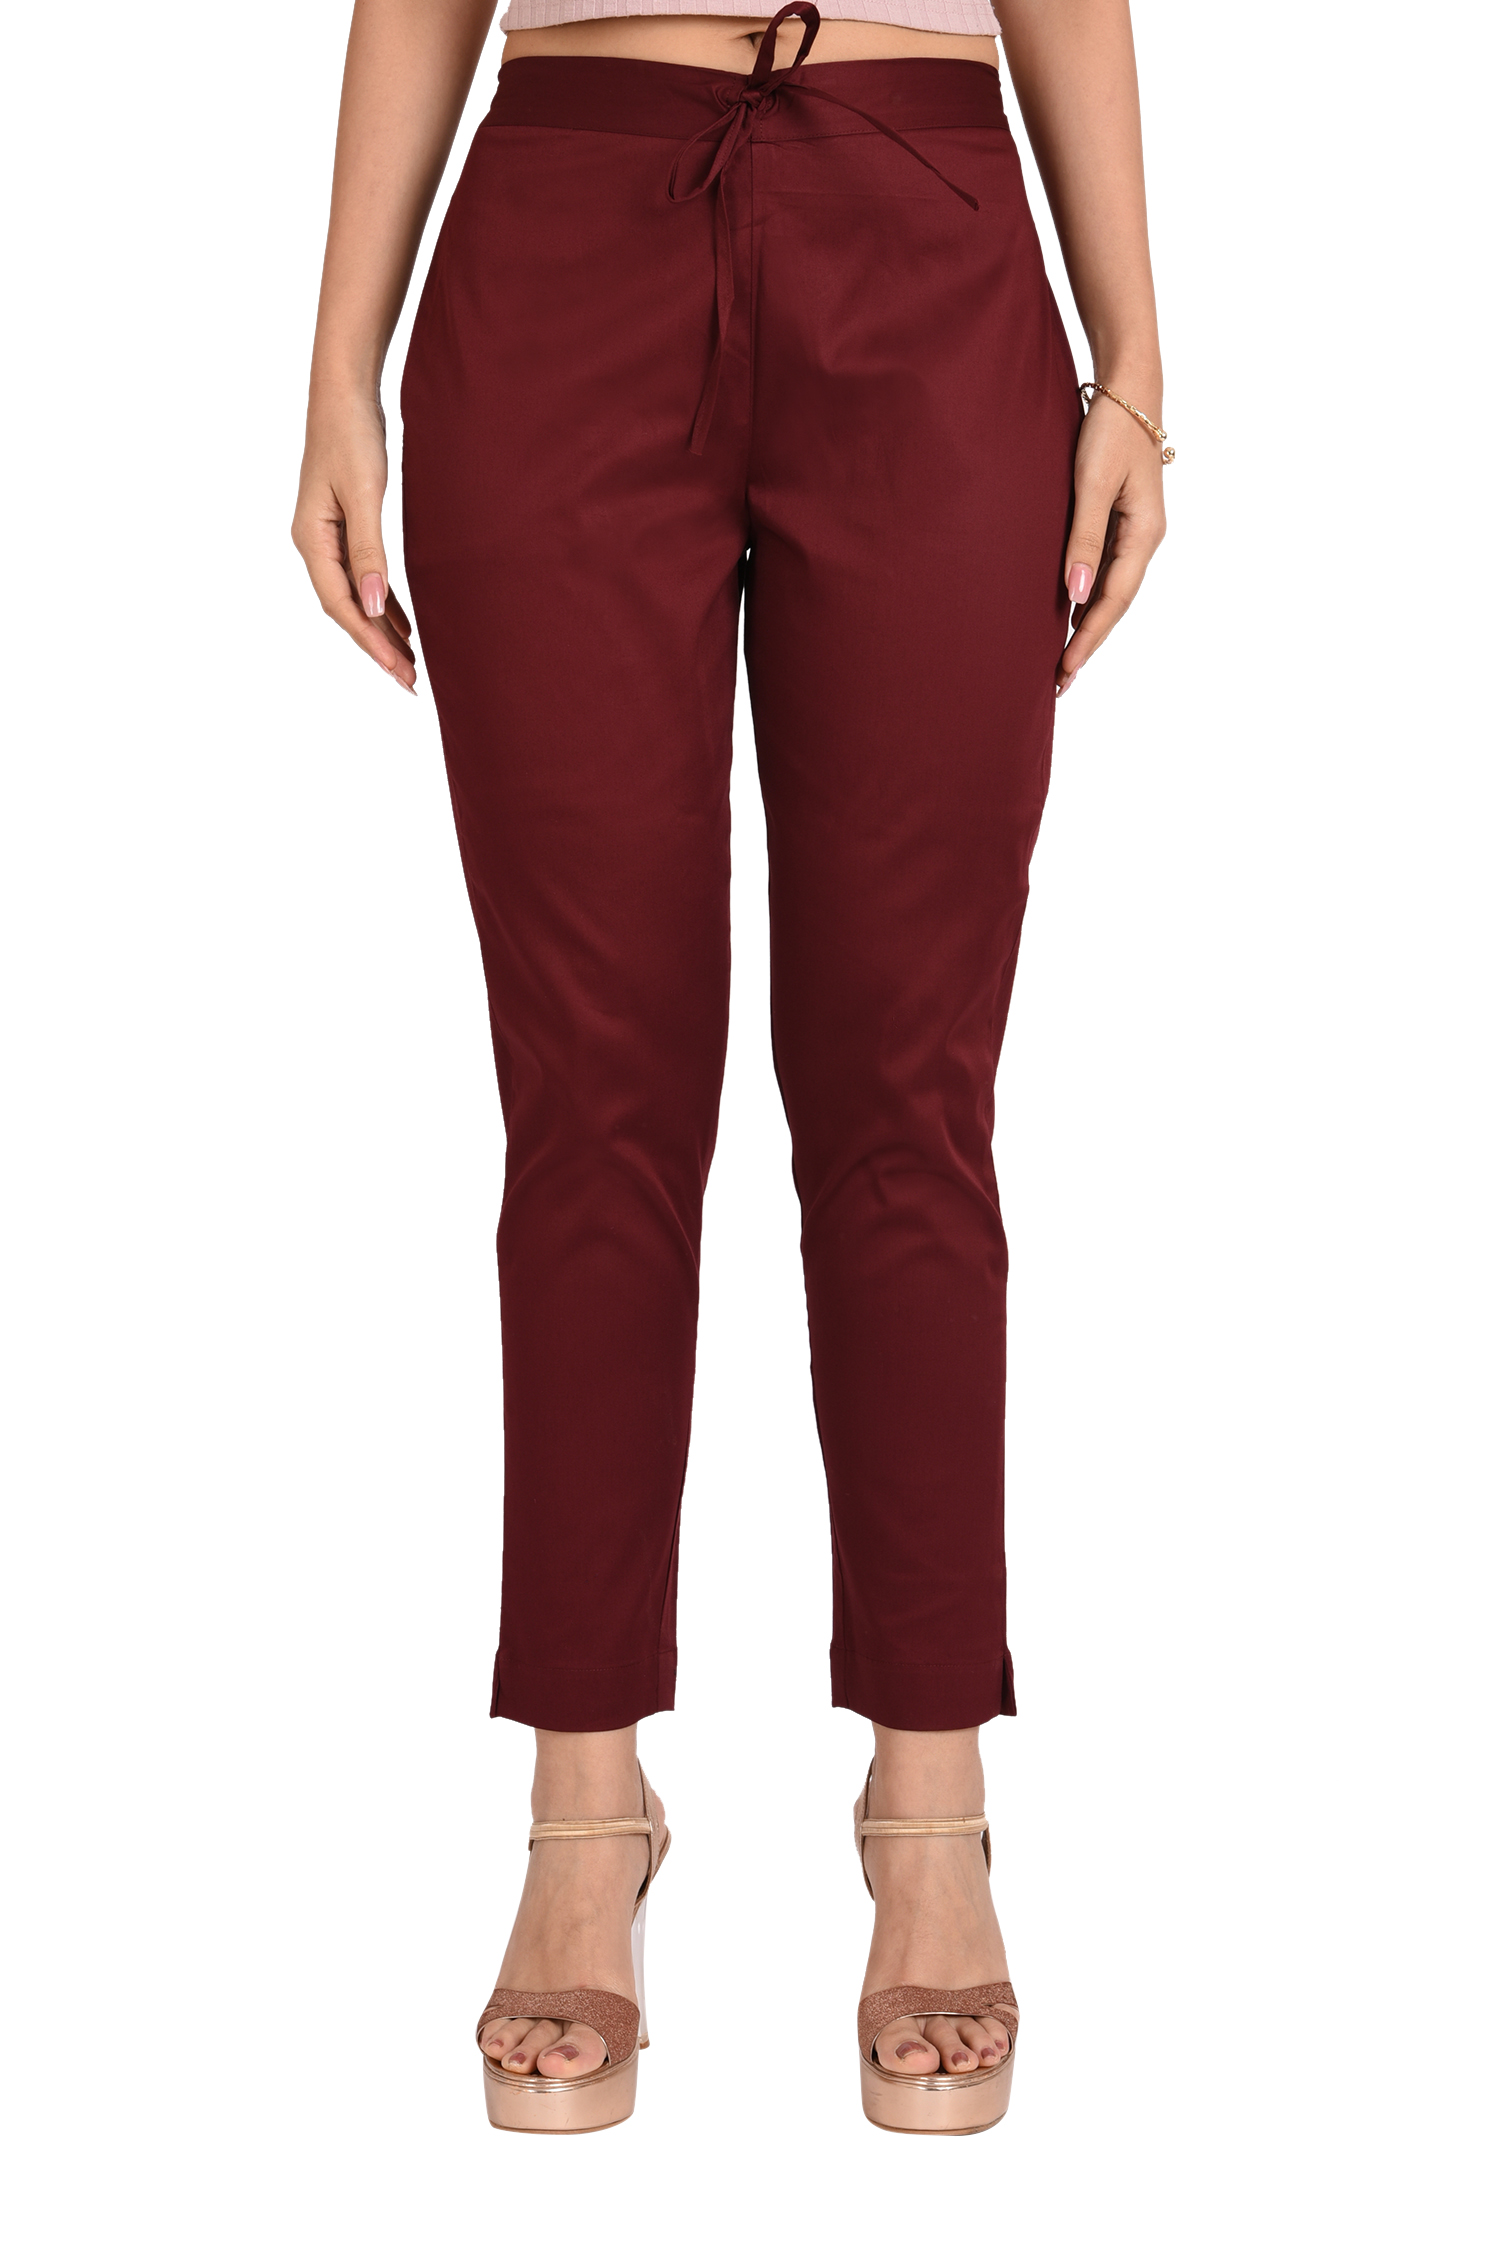 Womens Trousers Chinos Stretchable - Global Textile Source